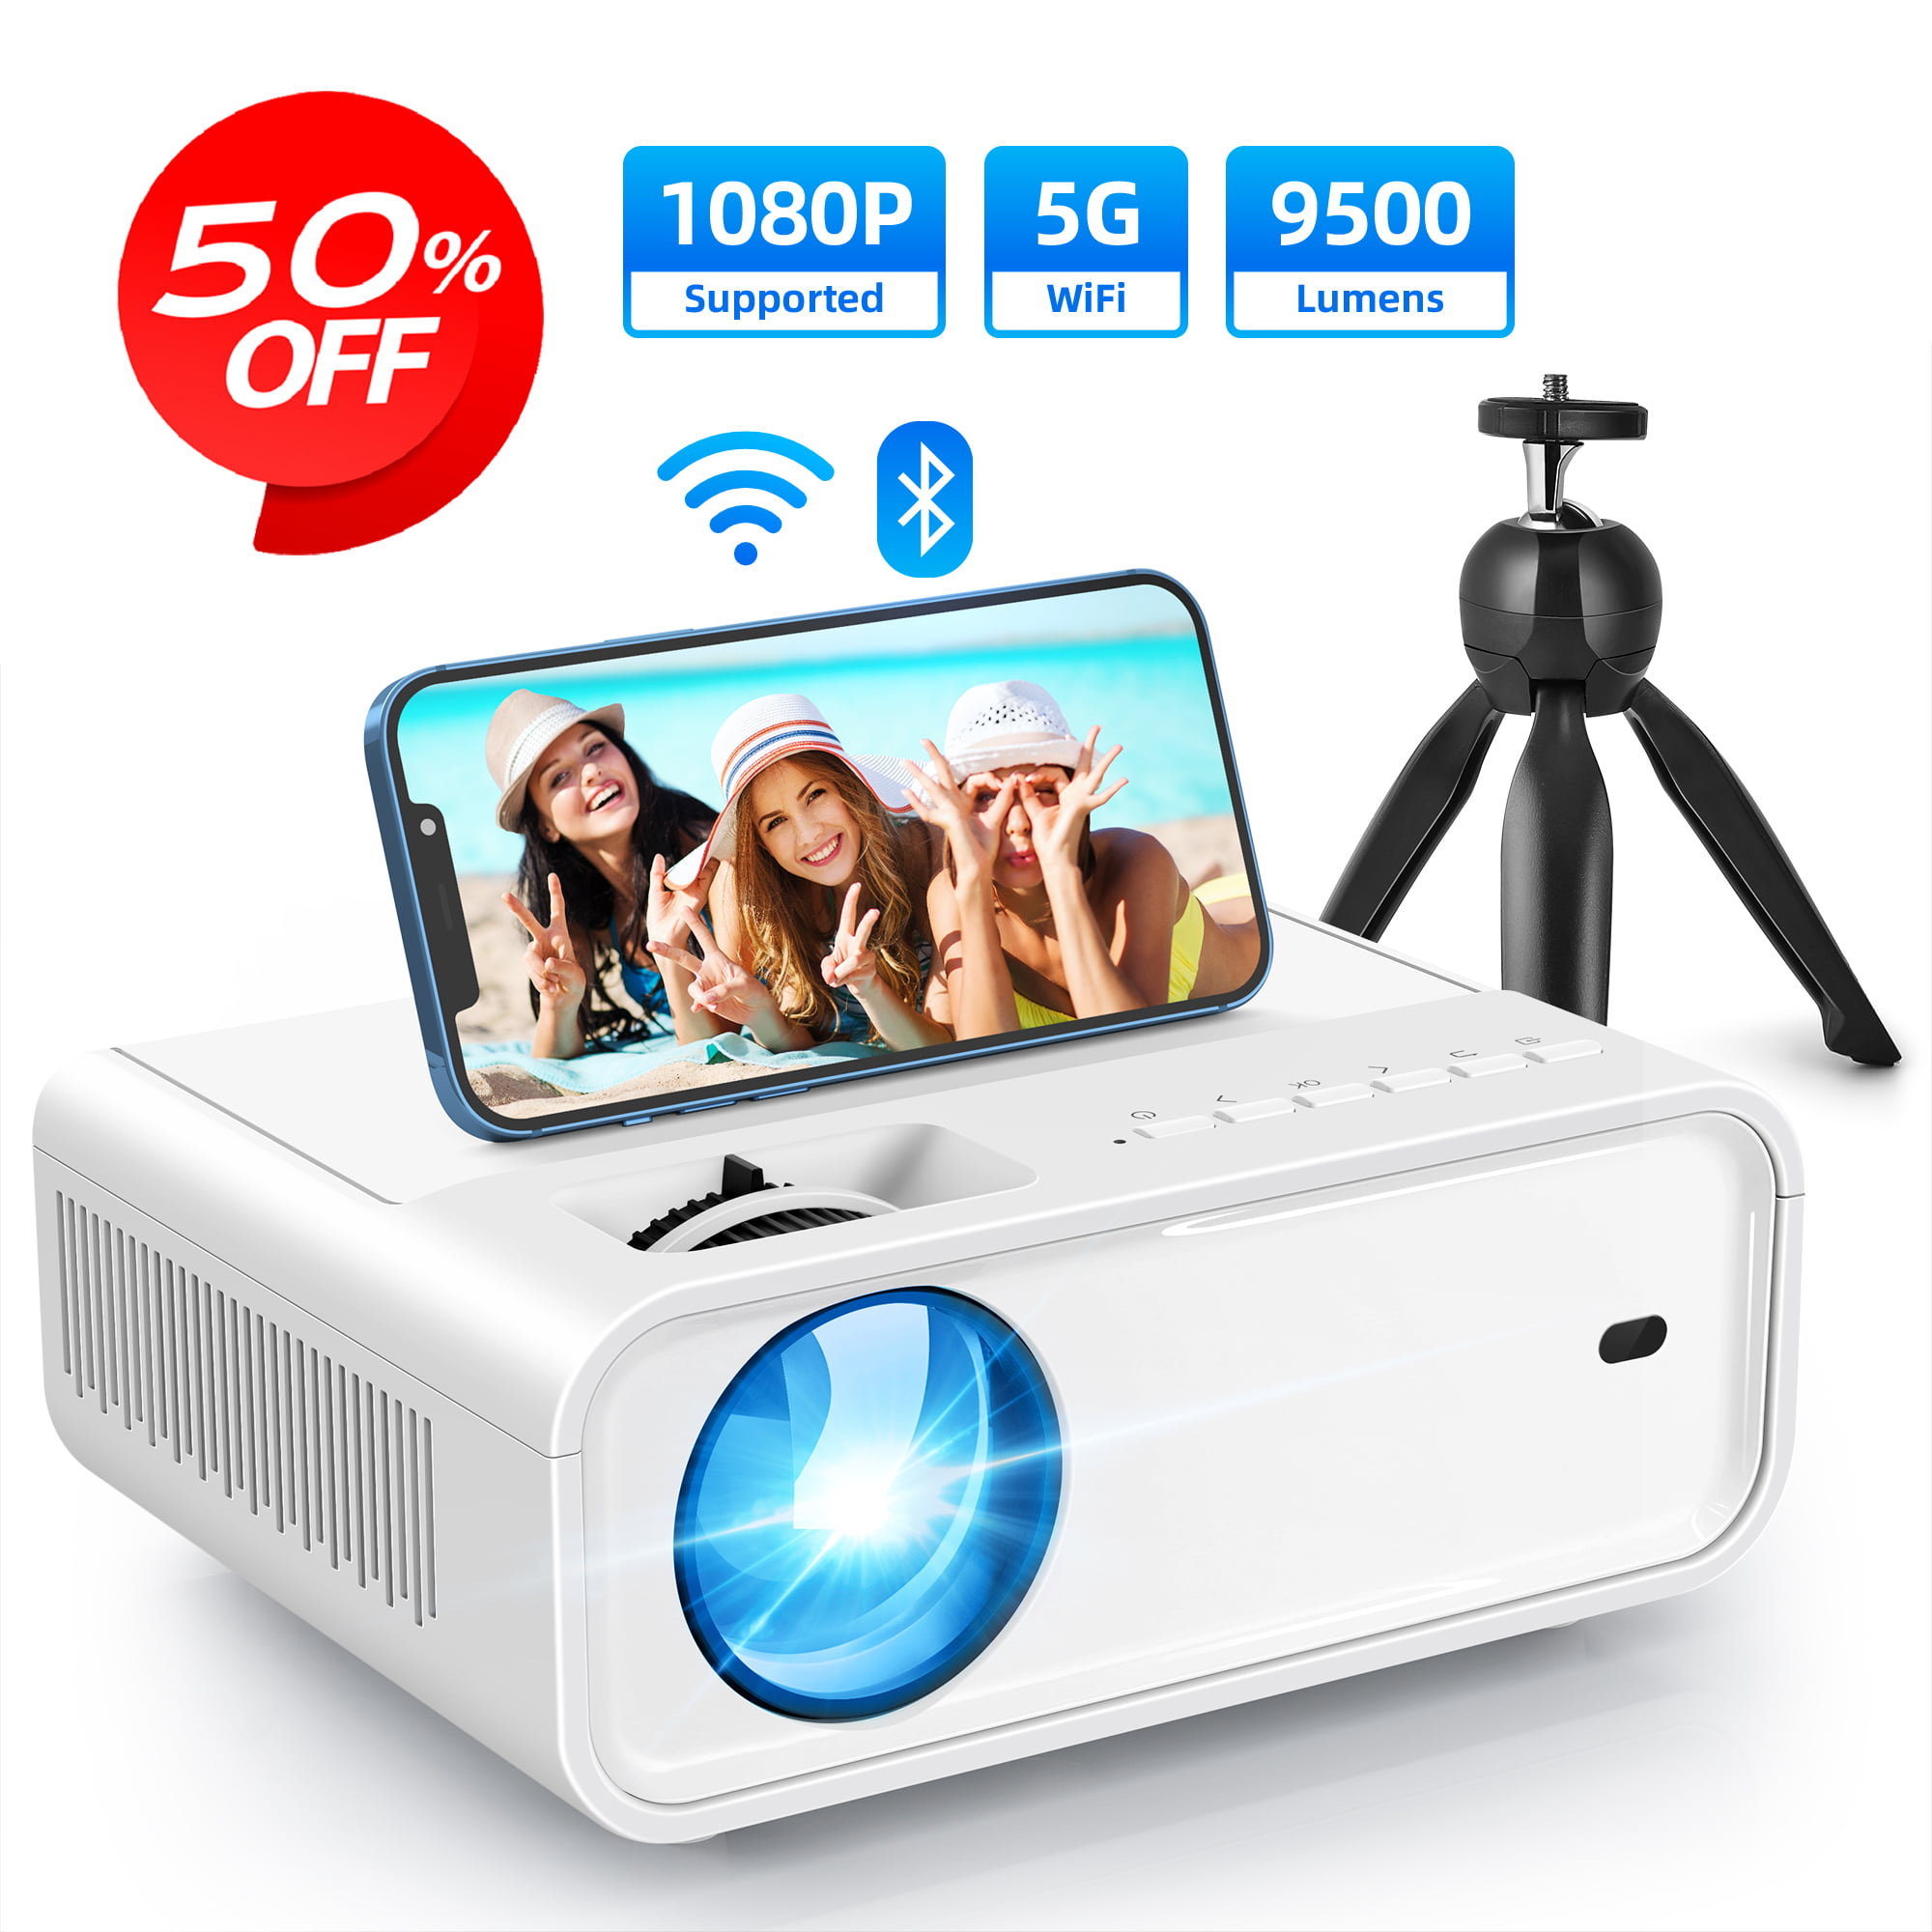 Remote Control and Carrying Bag White Veemi Mini Projector WiFi Projector for Home Theater Movie with HDMI USB AV Interfaces Portable Projector for Kids Adults Gift 